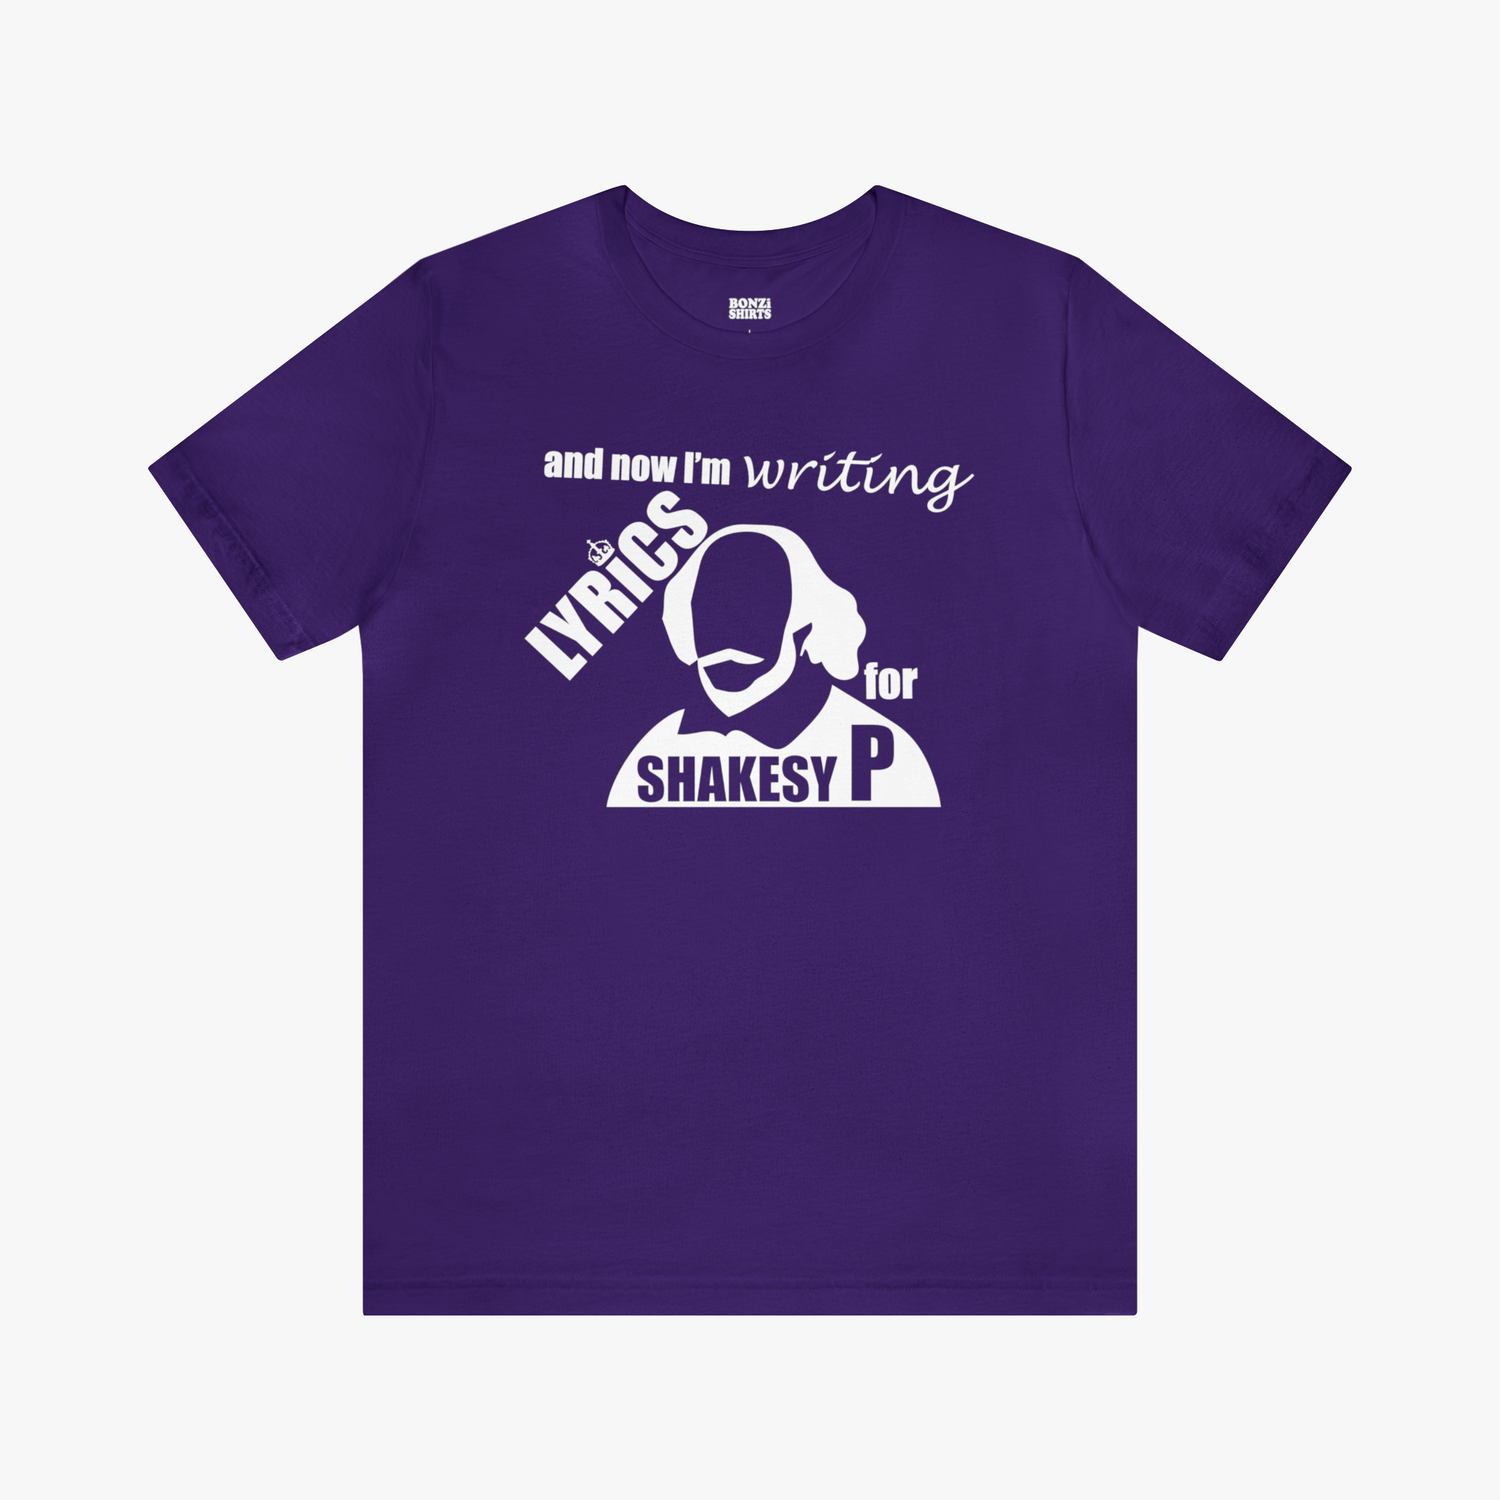 Six The Musical Writing Lyrics For Shakesy P T-Shirt [Modern Fit] in Purple